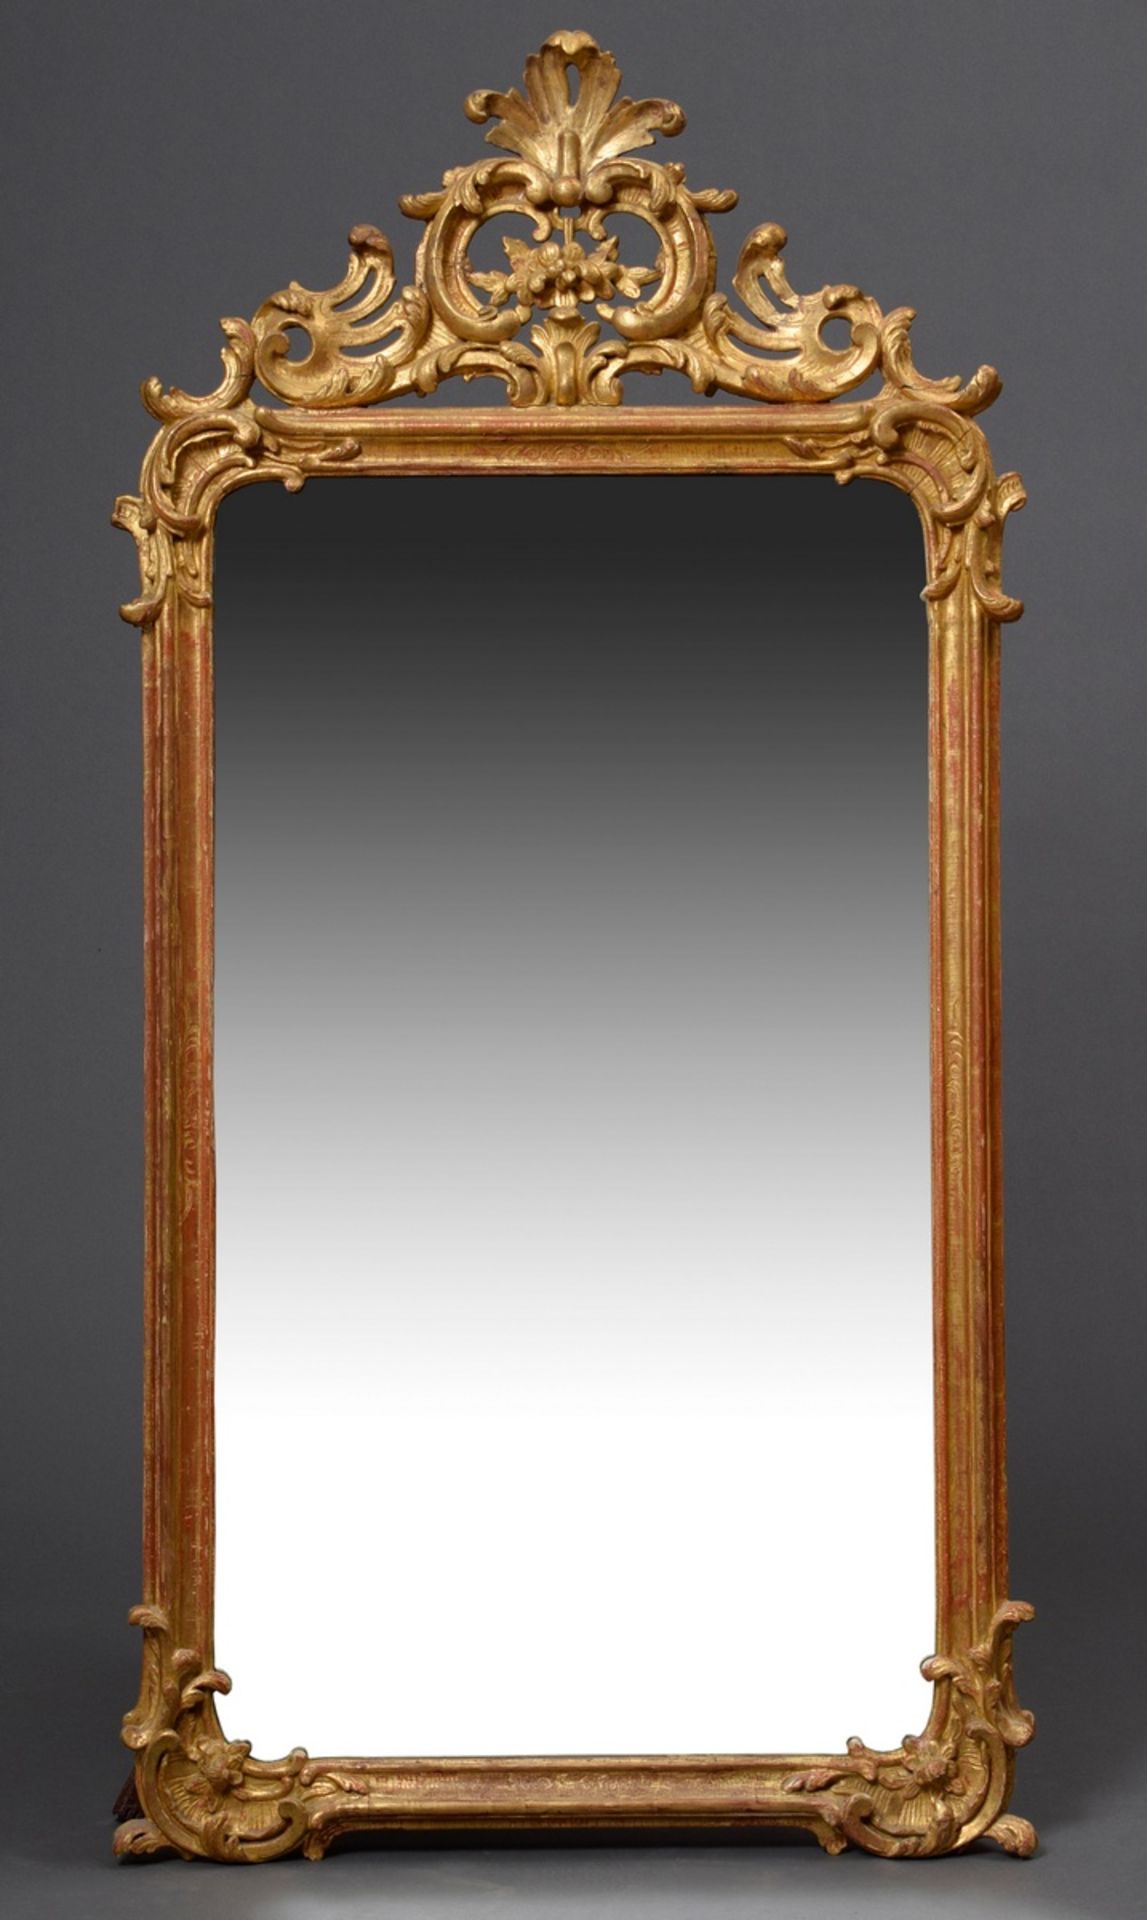 Large rococo console mirror with carved and gilded frame, openwork rocaille and floral carving in t